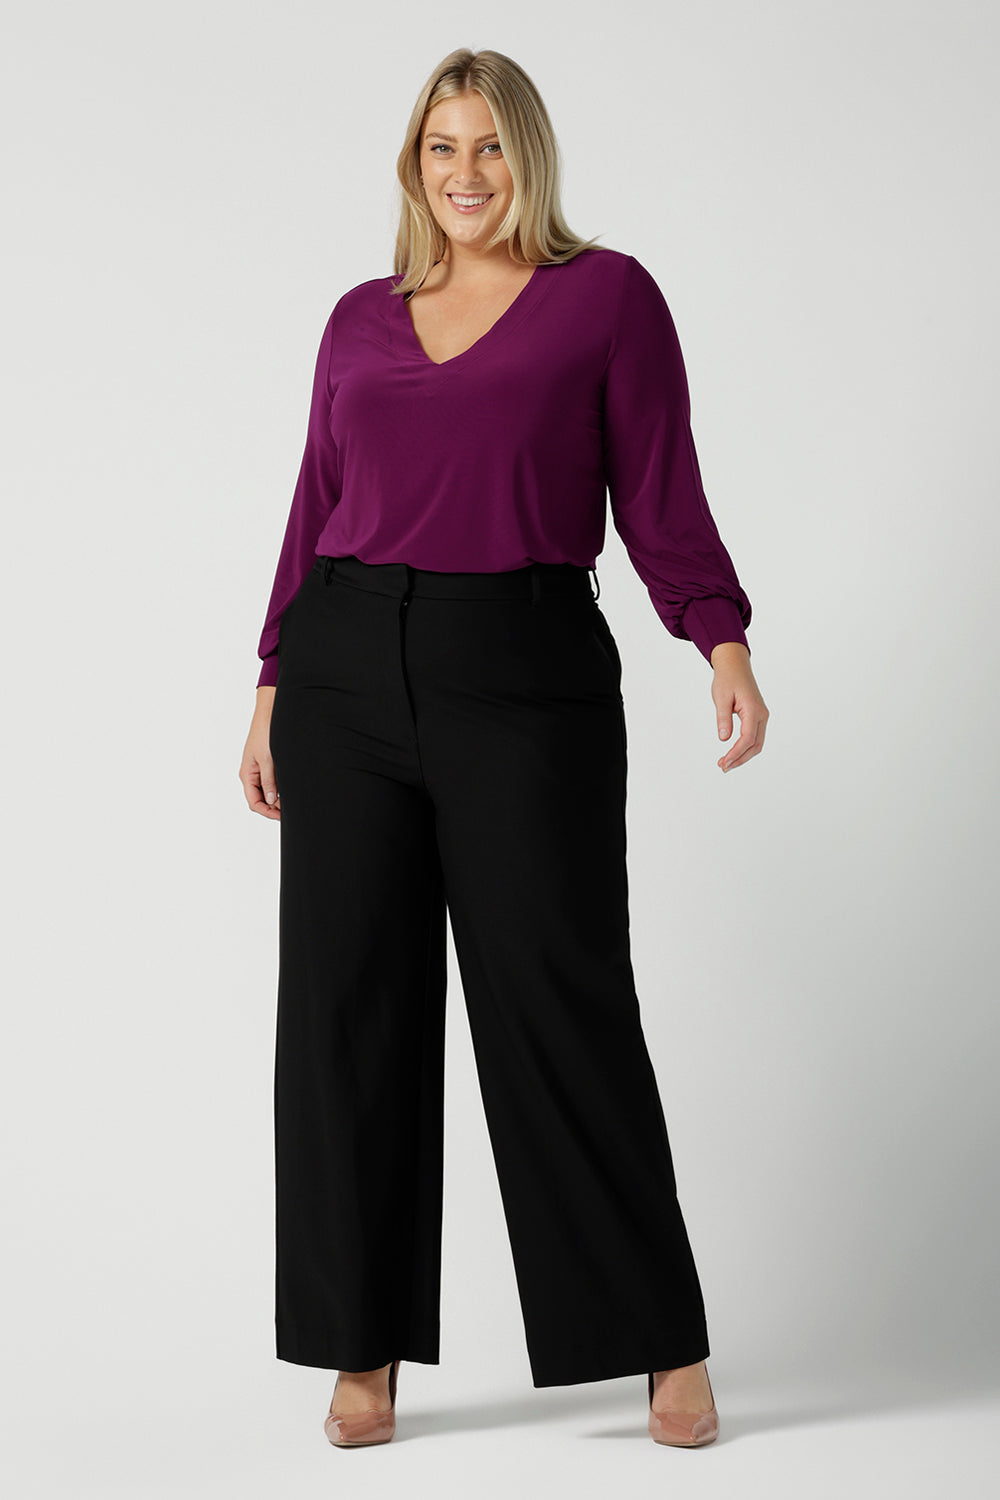 A size 18 woman wearing the Avery top in Magenta. A soft v-neck top with balloon sleeves and cuff detail. Made in Australia for women size 8 - 24. Styled back with a Kate pant in black